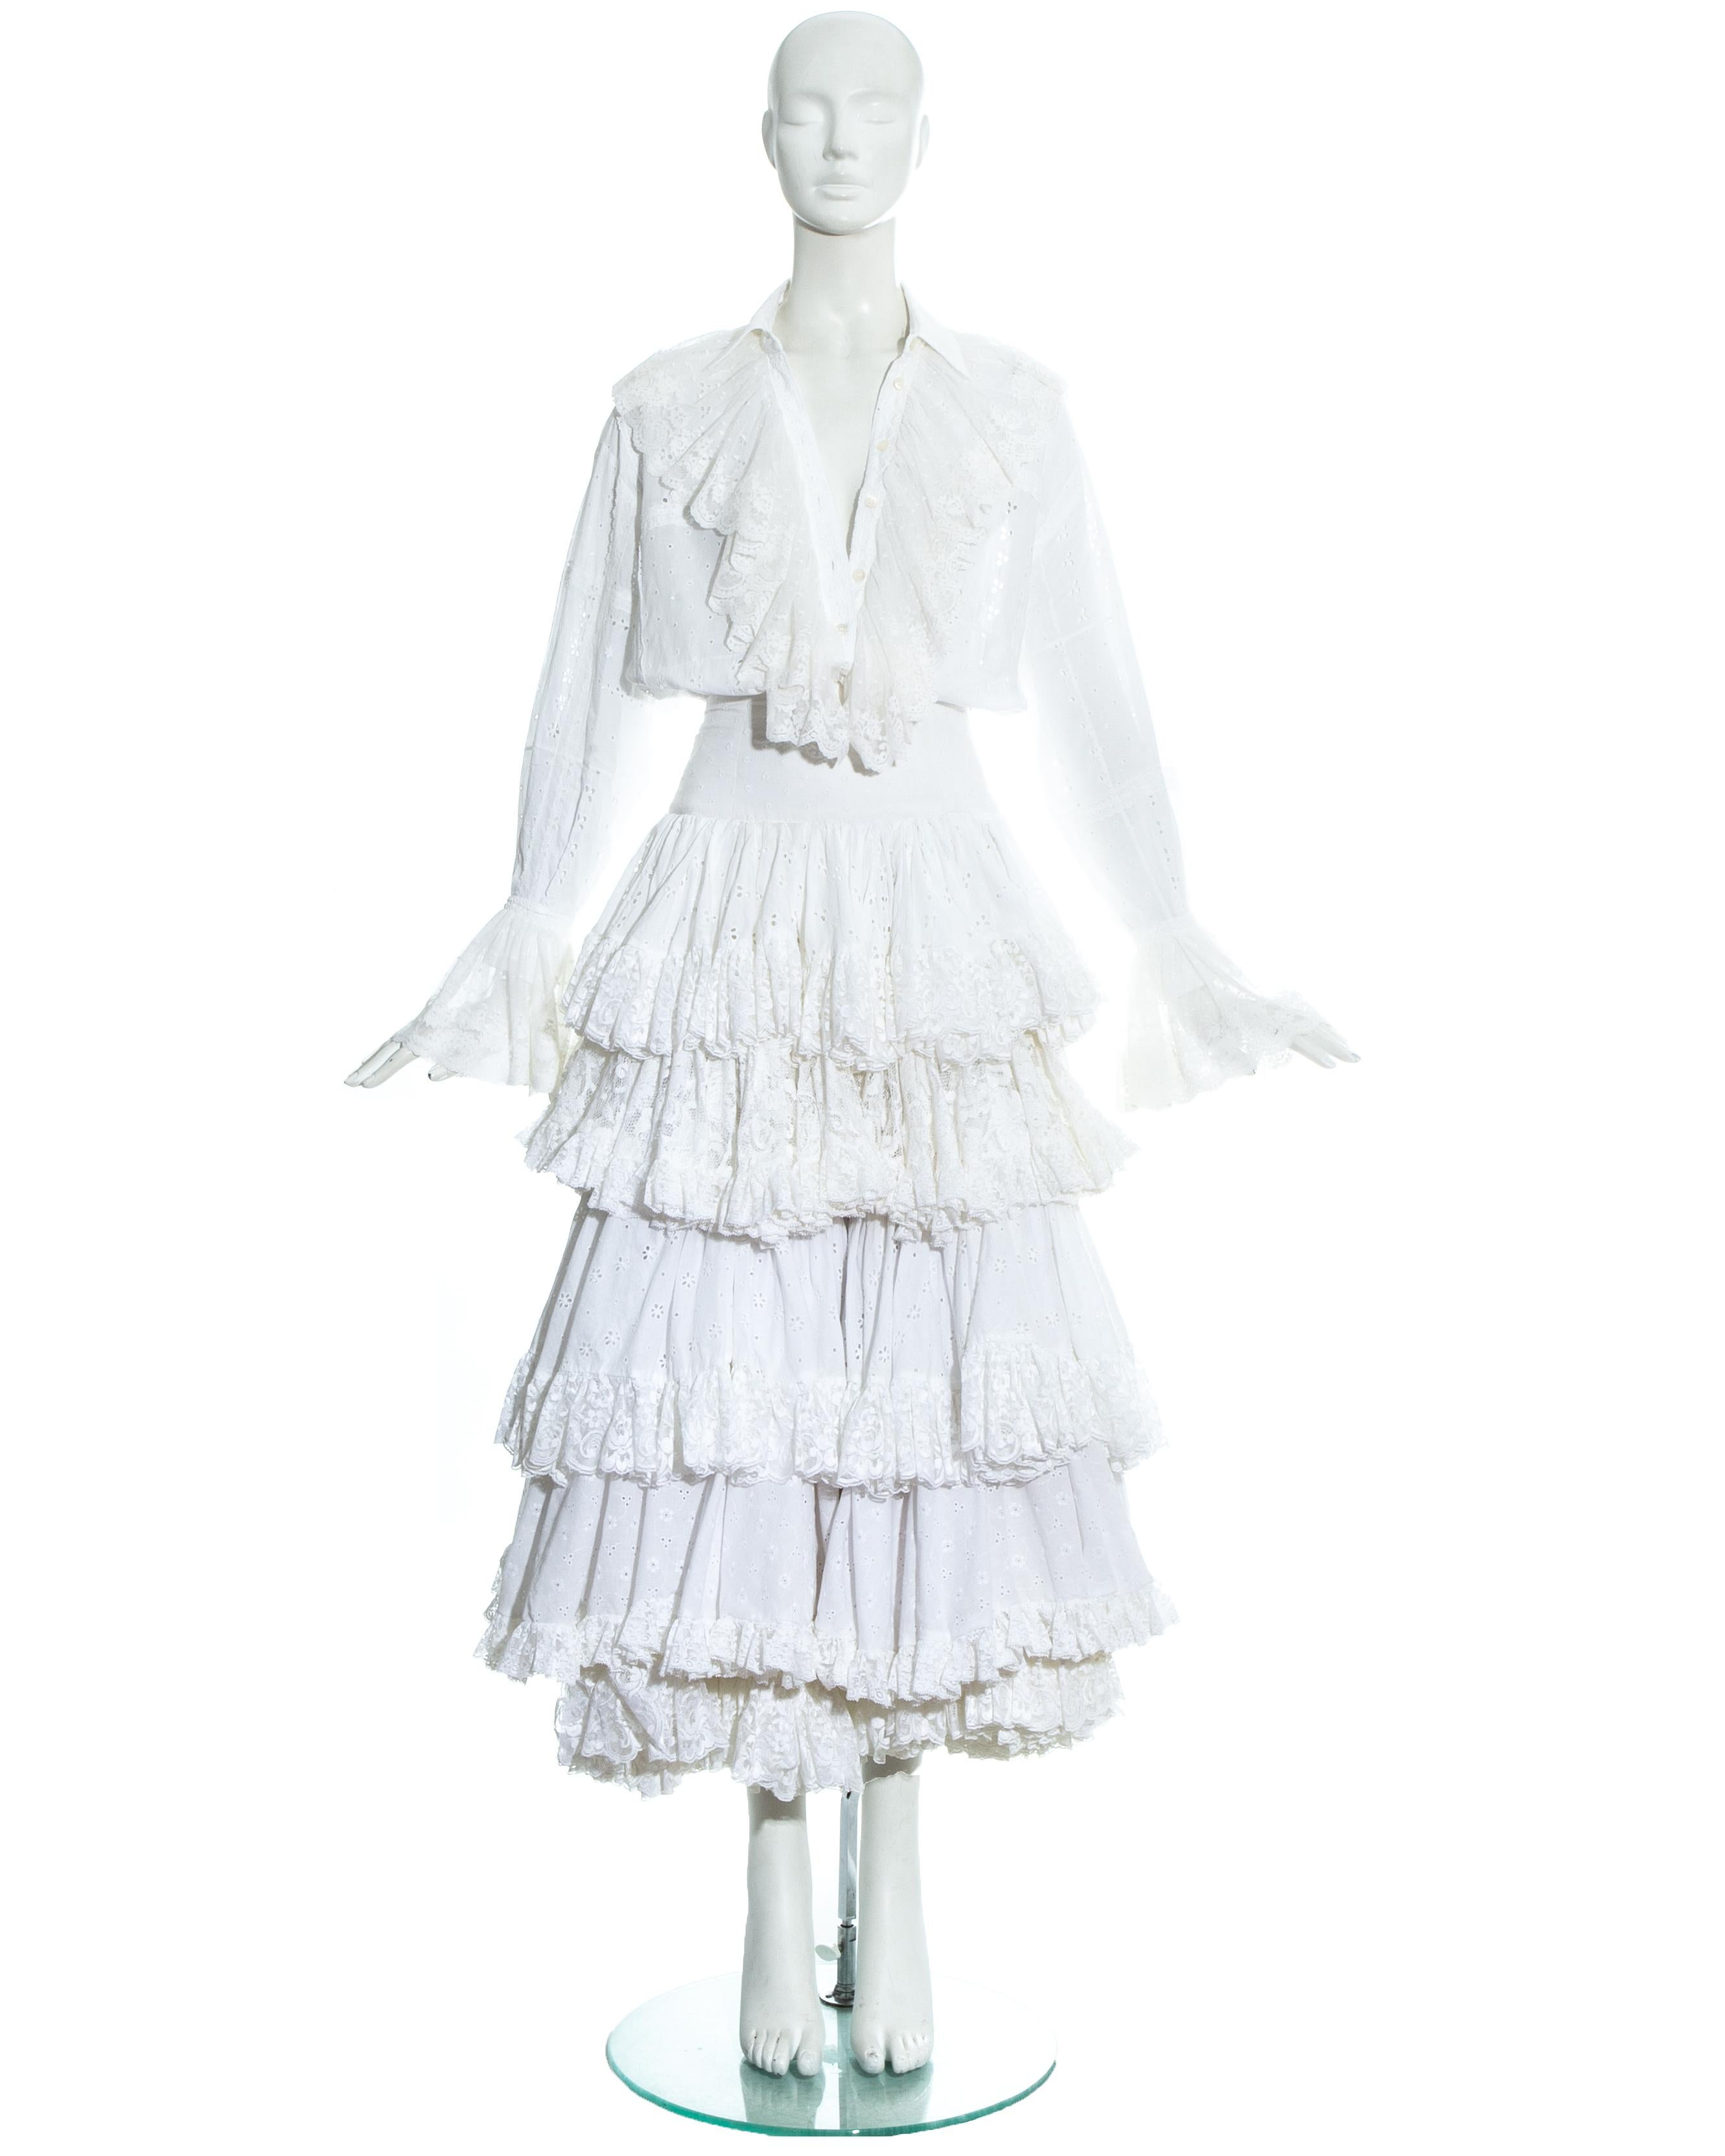 Dolce & Gabbana white cotton broderie anglaise and lace skirt and blouse set. Heavy layered skirt with accentuated waist and poet blouse with lace ruffles. 

Spring-Summer 1993